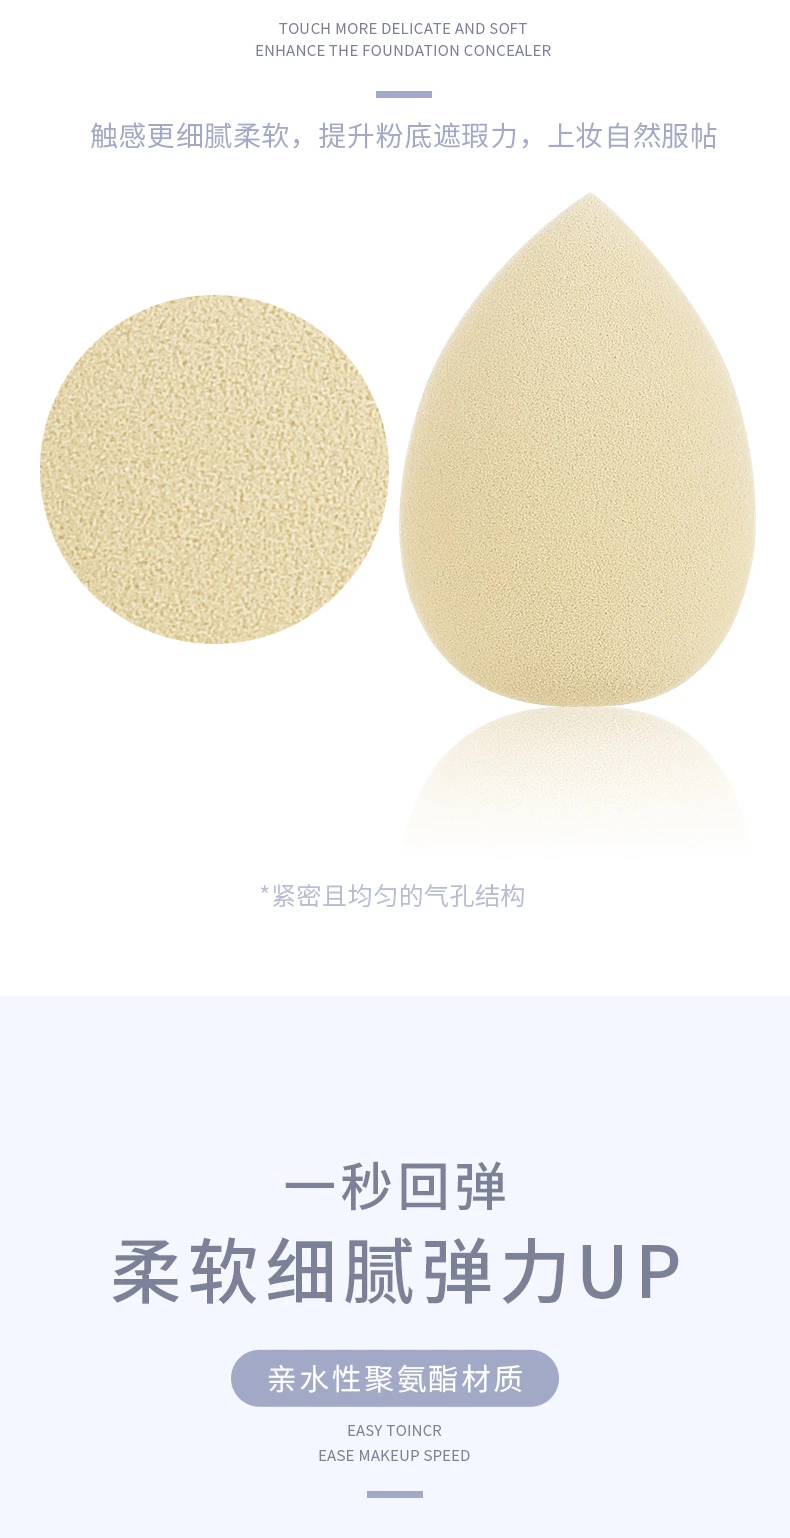 Ultra-Soft Makeup Egg 4 Packs Plus Support Set Which Will Become Large in Case of Water Dry and Wet Powder Puff